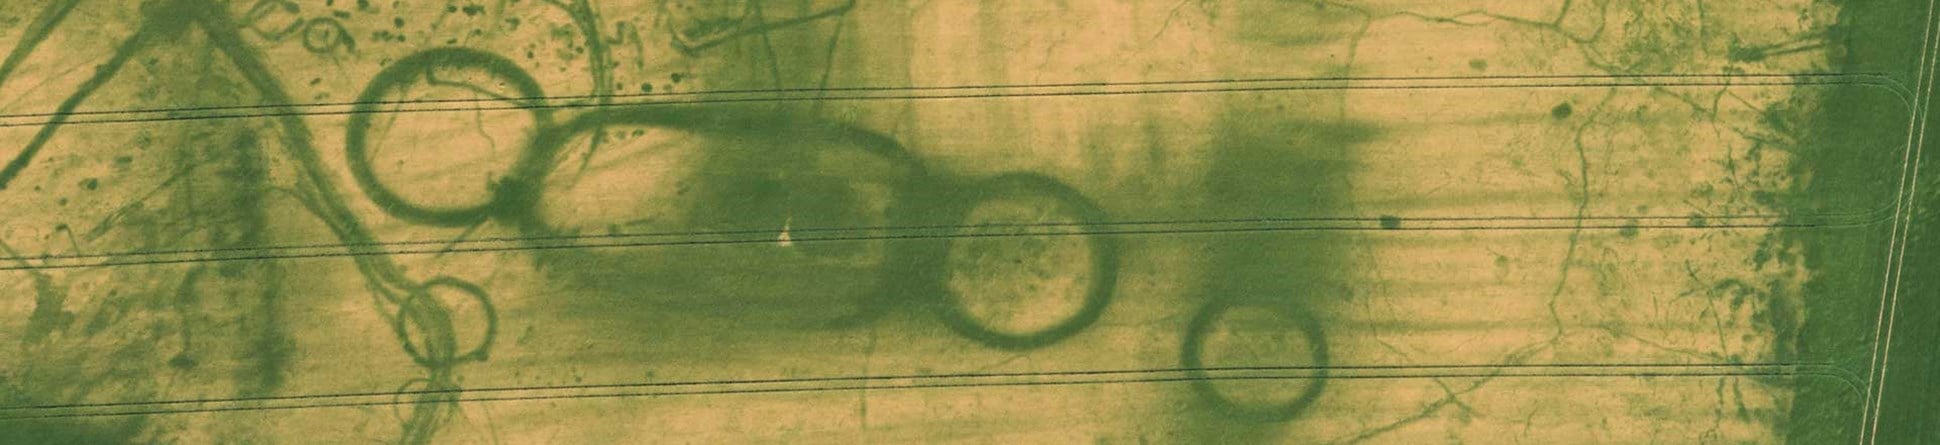 Colour aerial photograph showing an arable crop with archaeological features visible